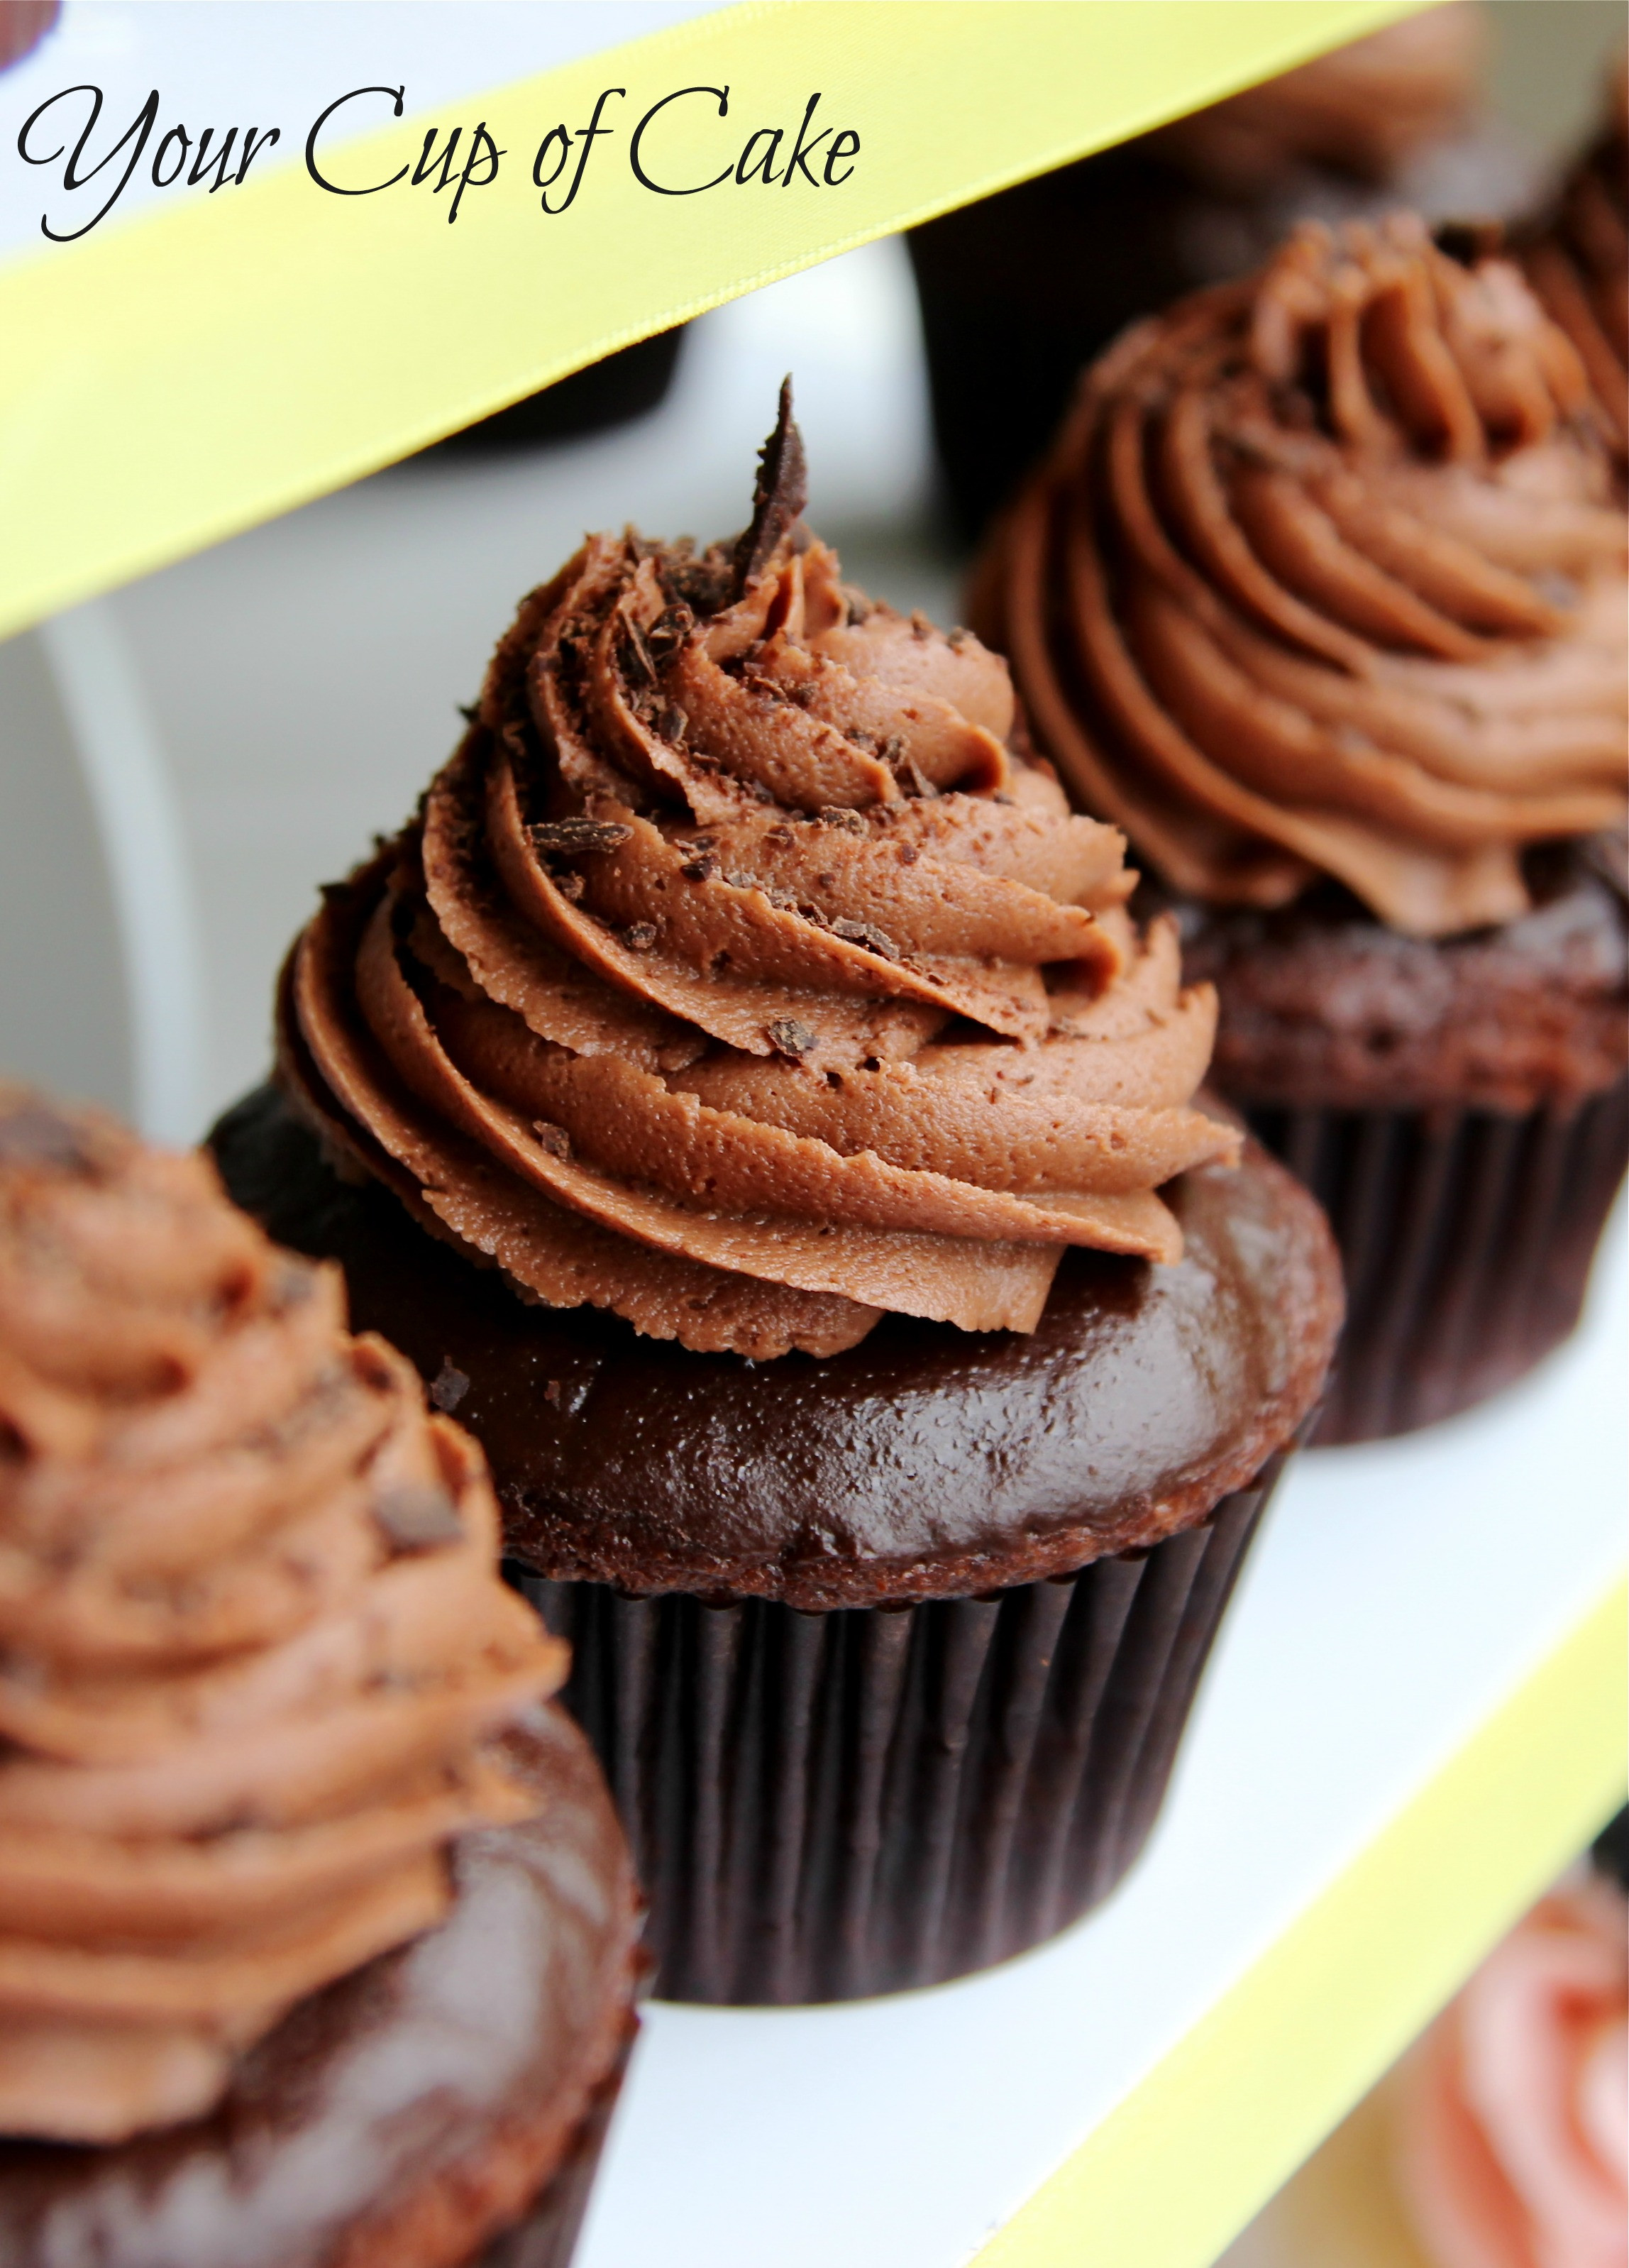 Best Chocolate Cupcakes
 My Favorite Chocolate Cupcake Your Cup of Cake